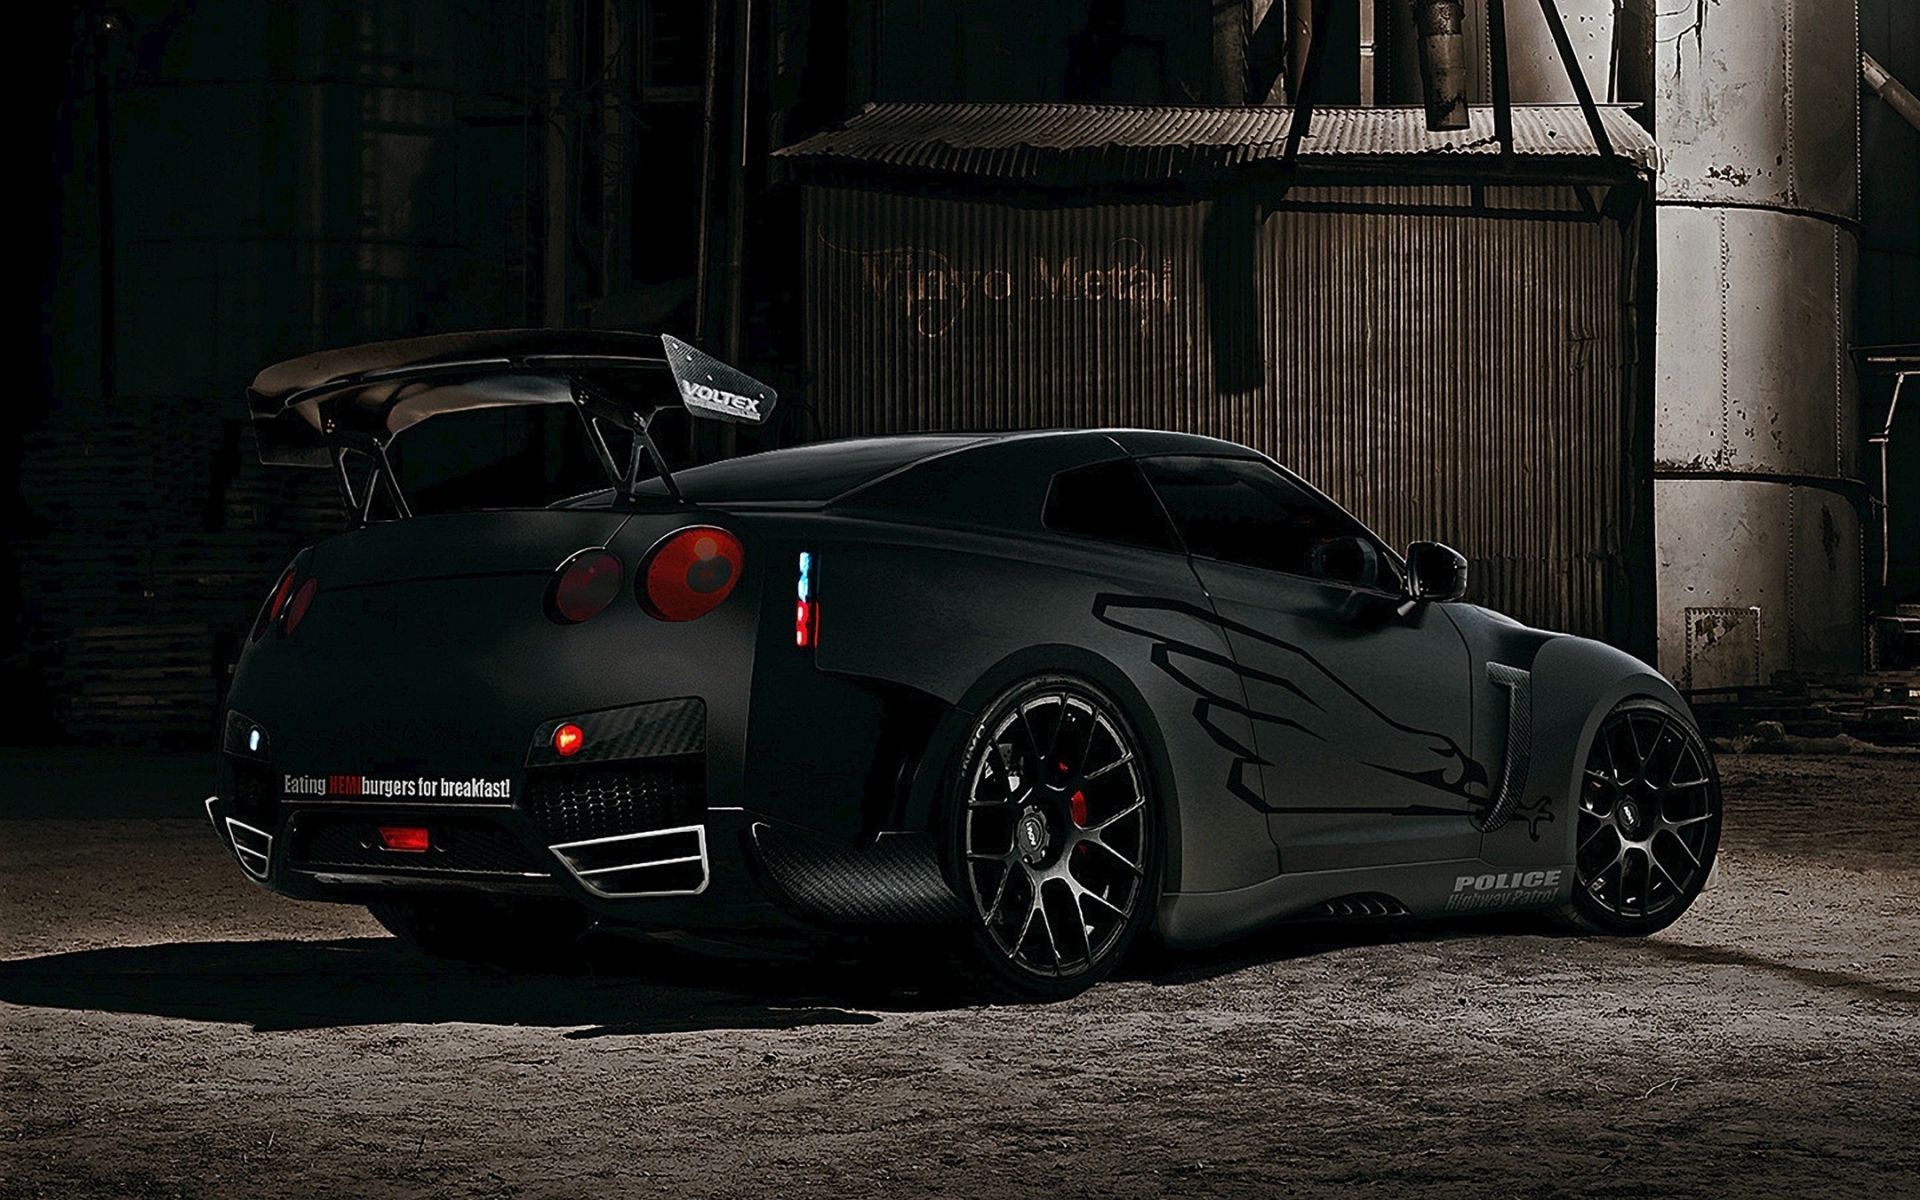 R35 Gtr Wallpapers Group 86